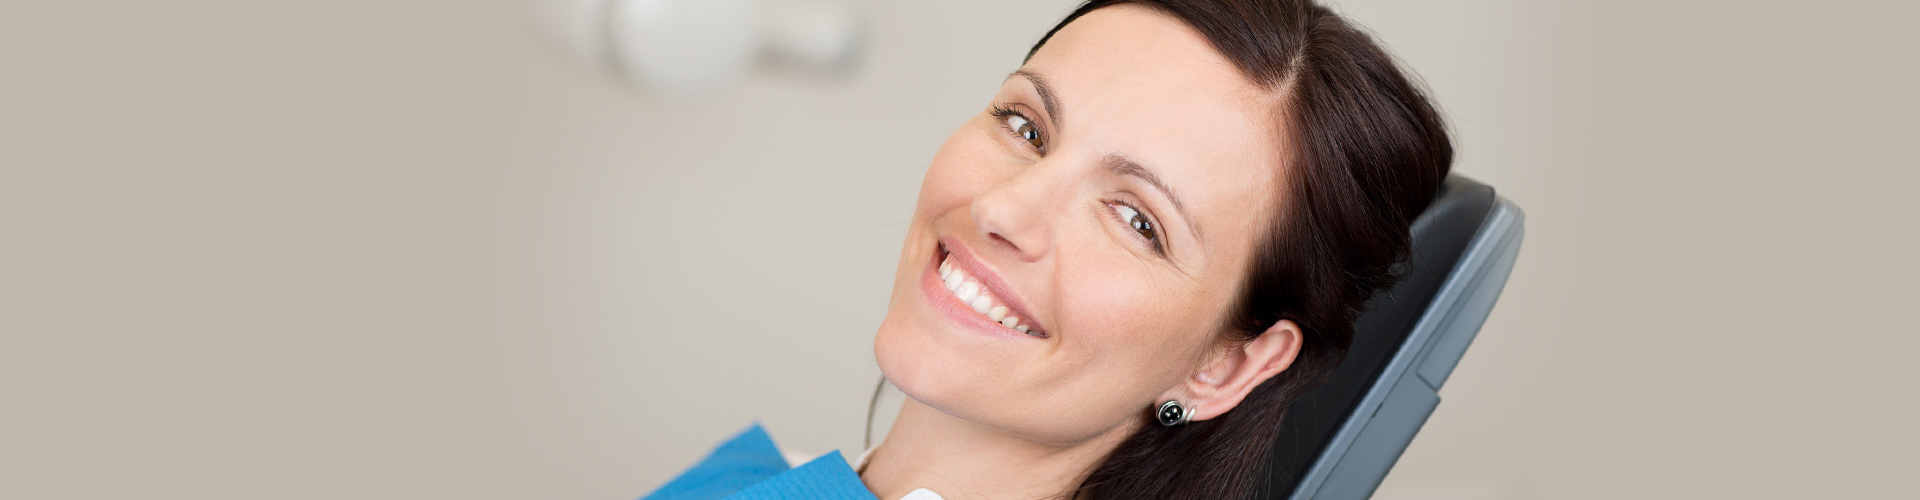 Appointment Confirmation Policy - Briglia Dental Group West Chester PA